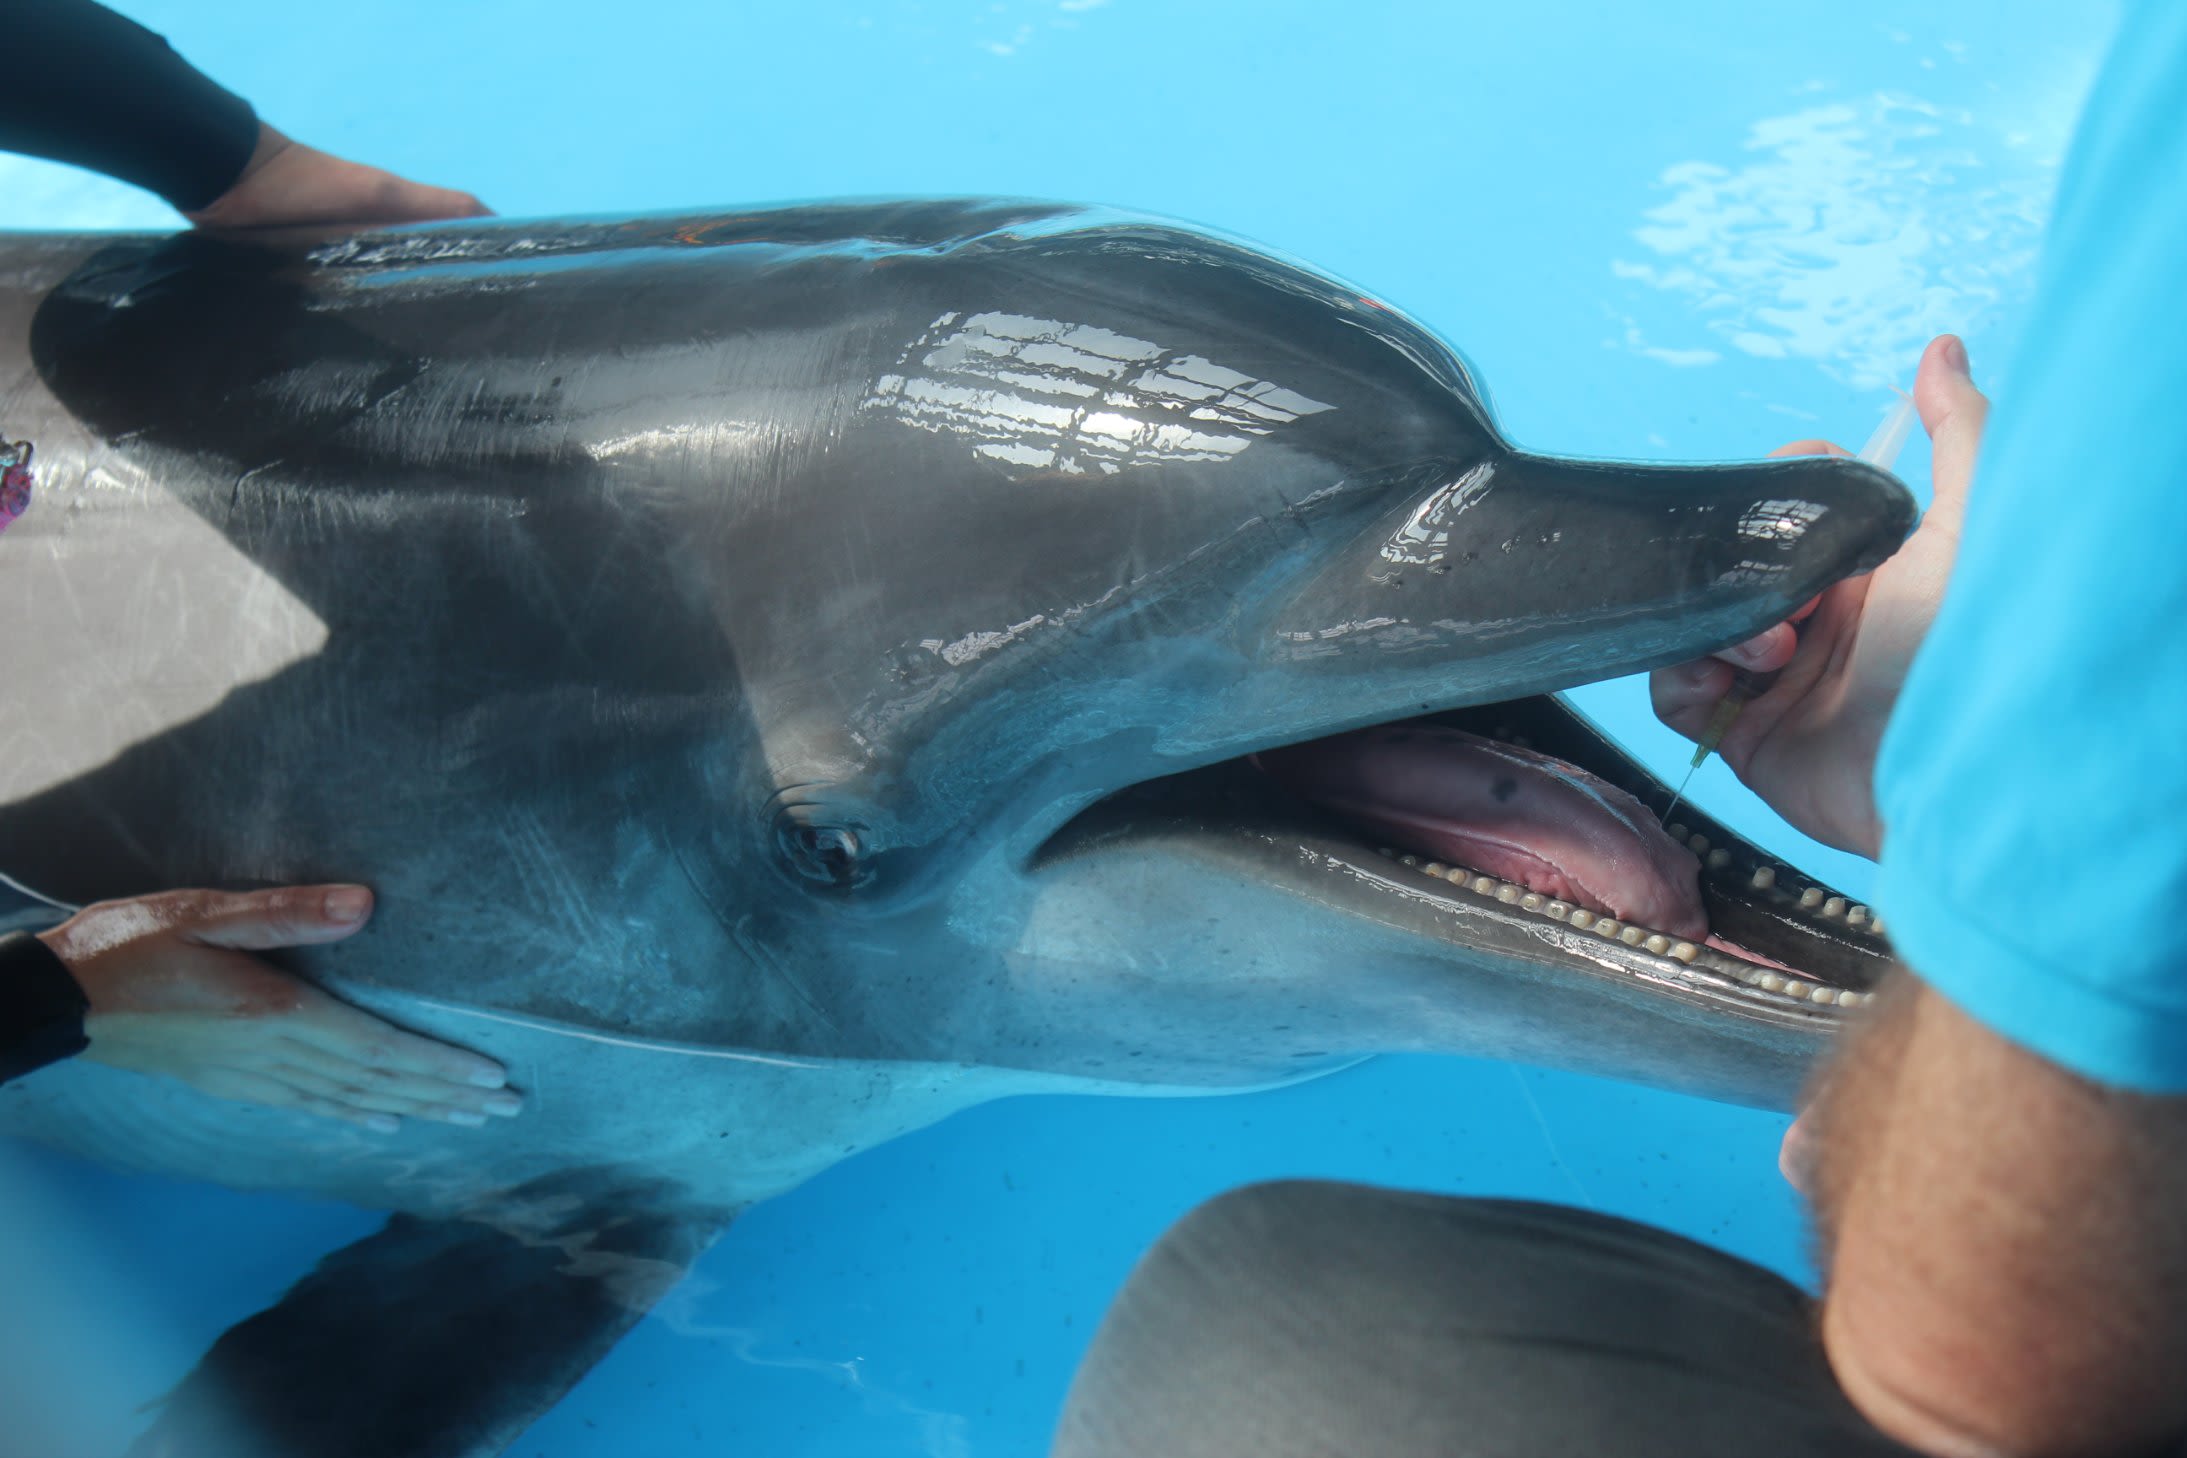 Dolphin mouths house 'dark matter of the biological world'